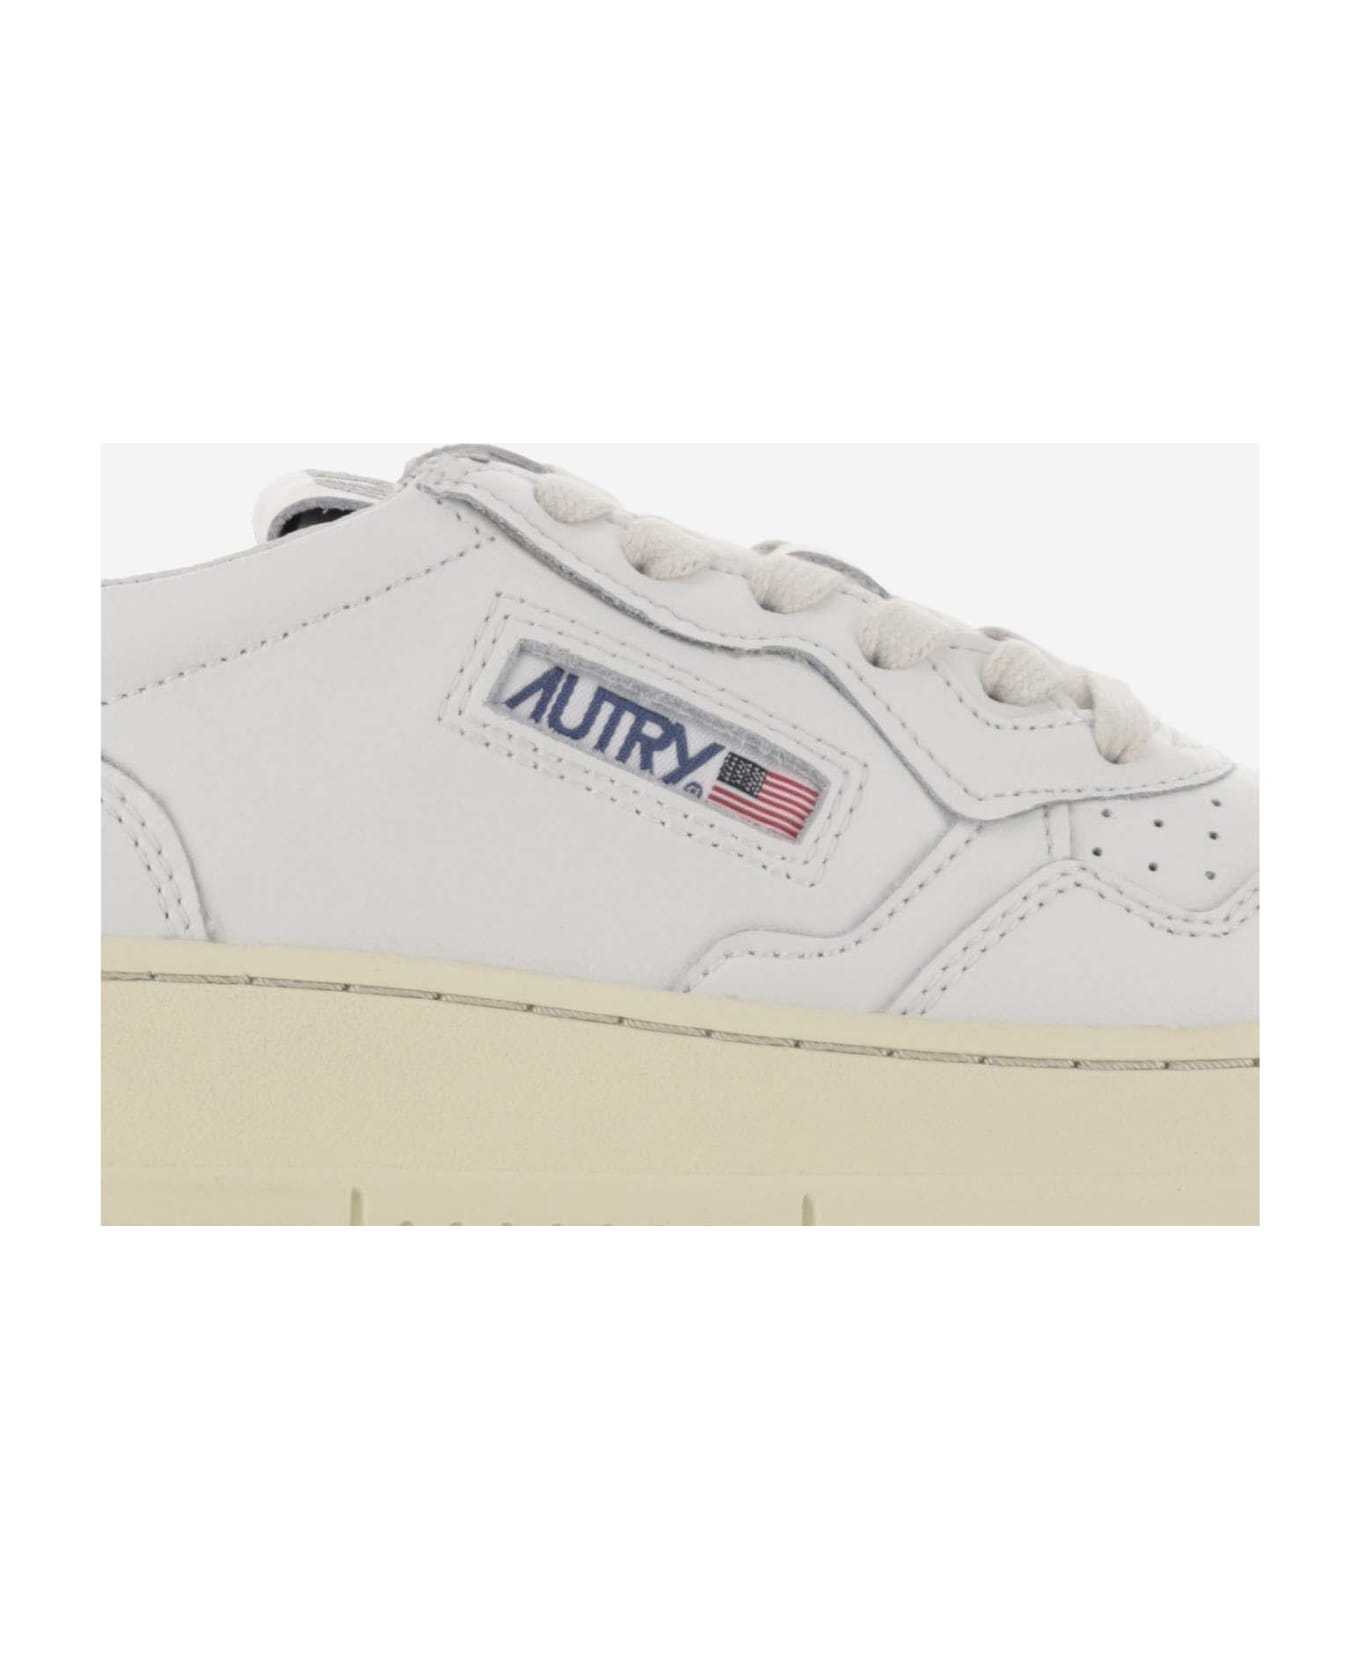 Autry Low Medalist Sneakers - bianco